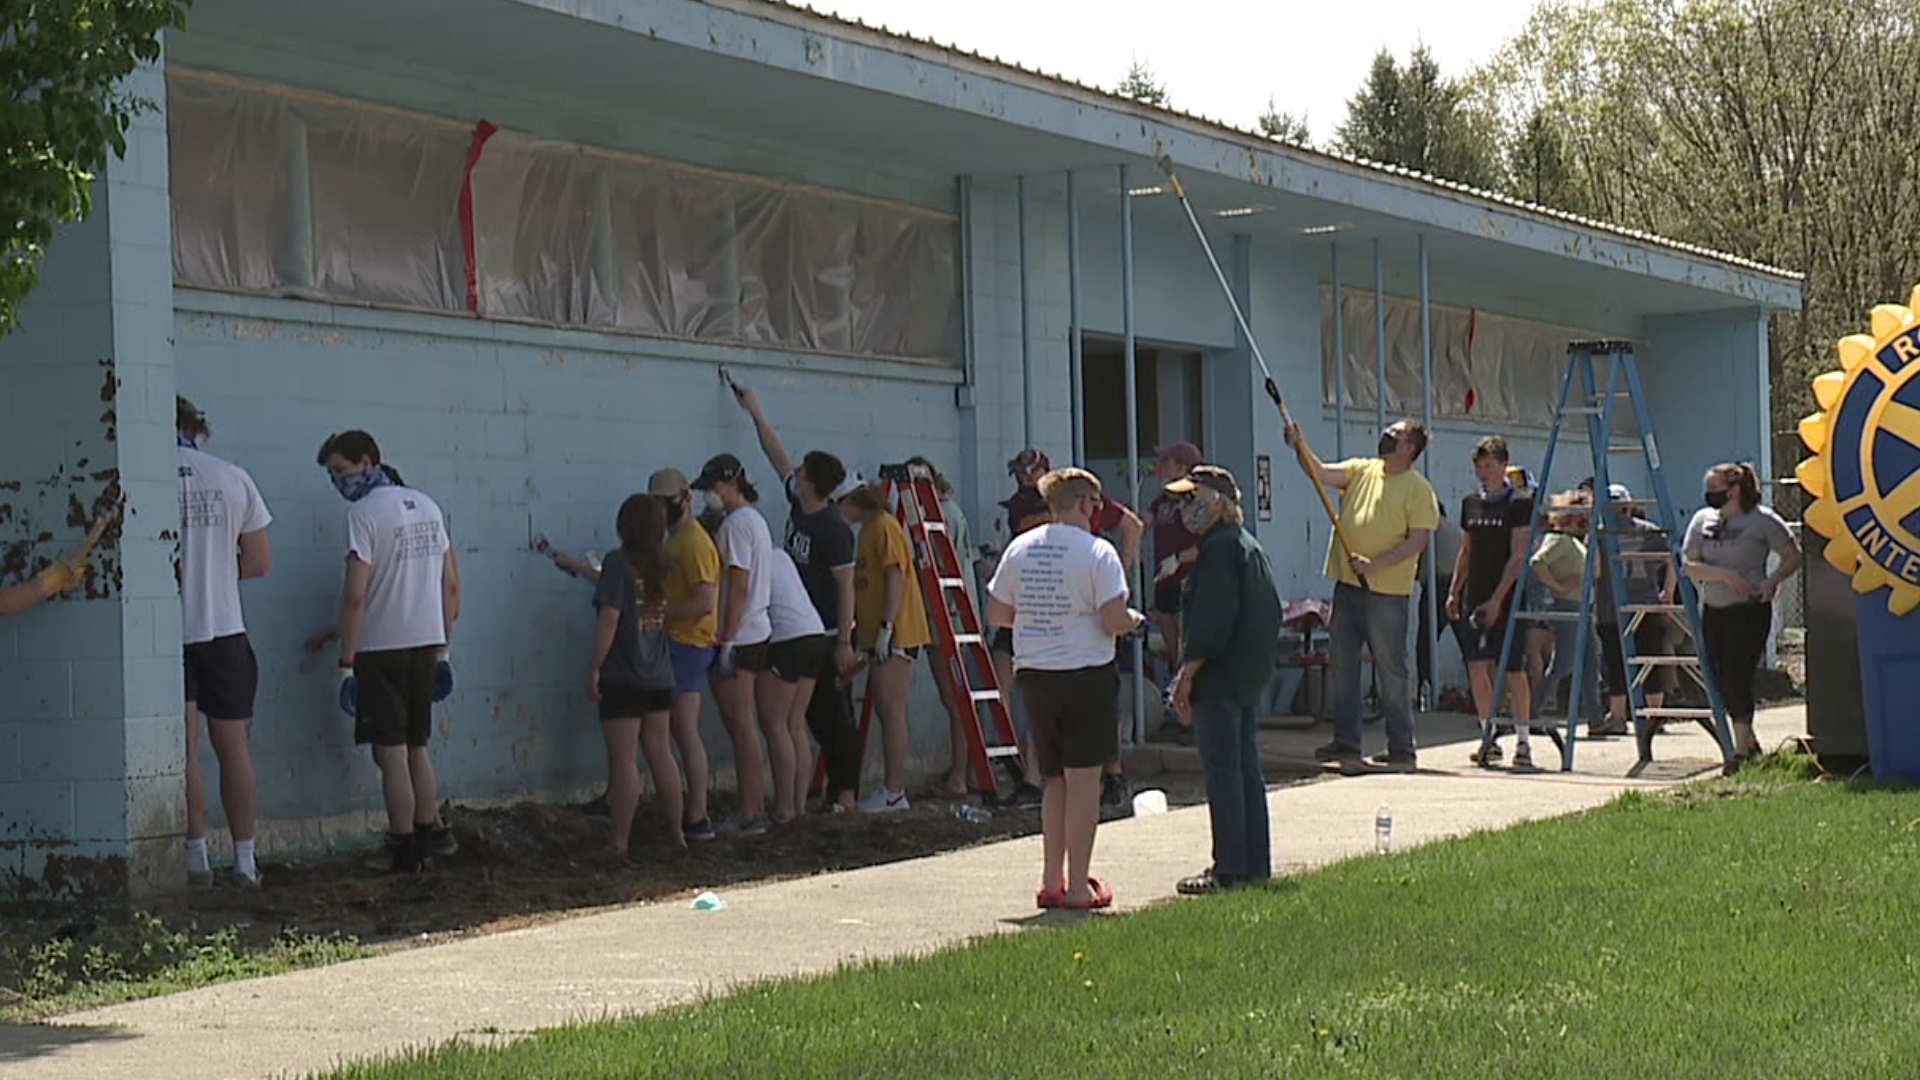 Folks spent a part of their Sunday cleaning up a staple of the community.